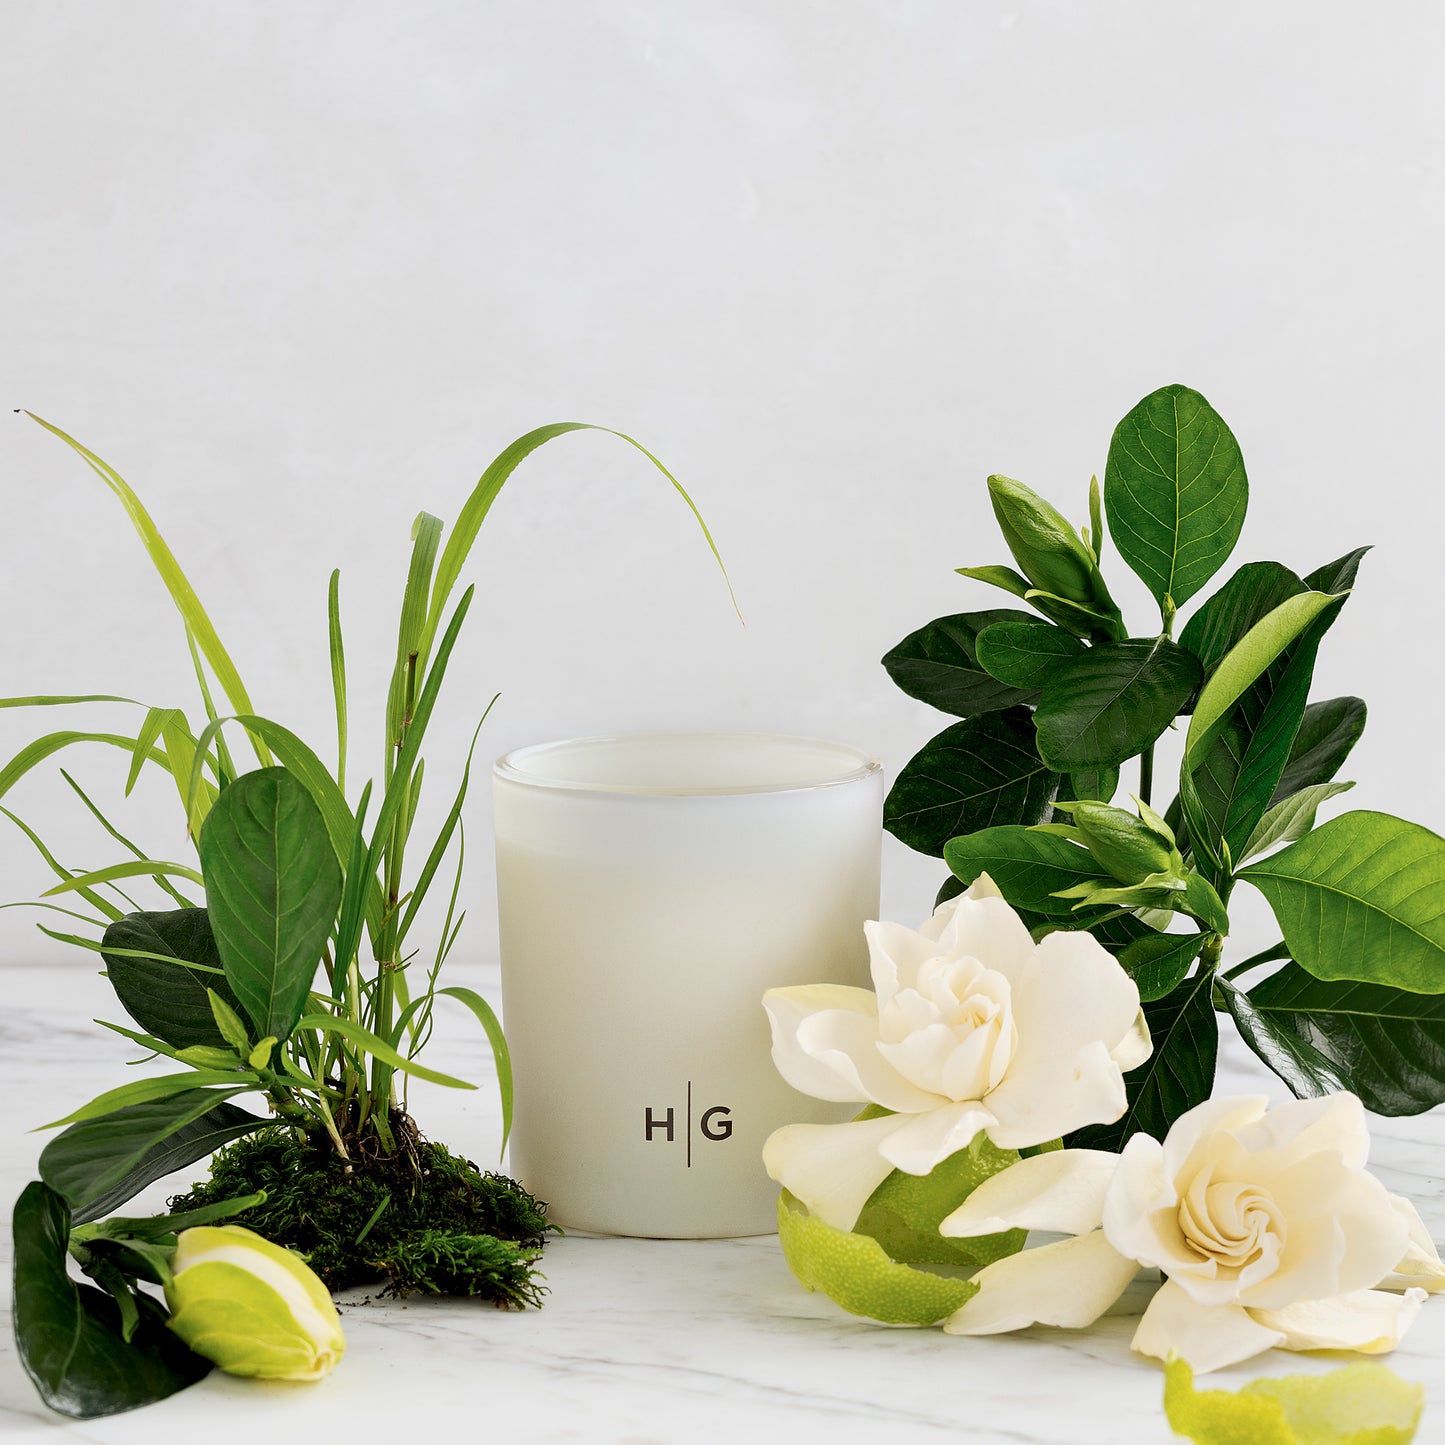 Hudson Grace Greenwich Scented Candle